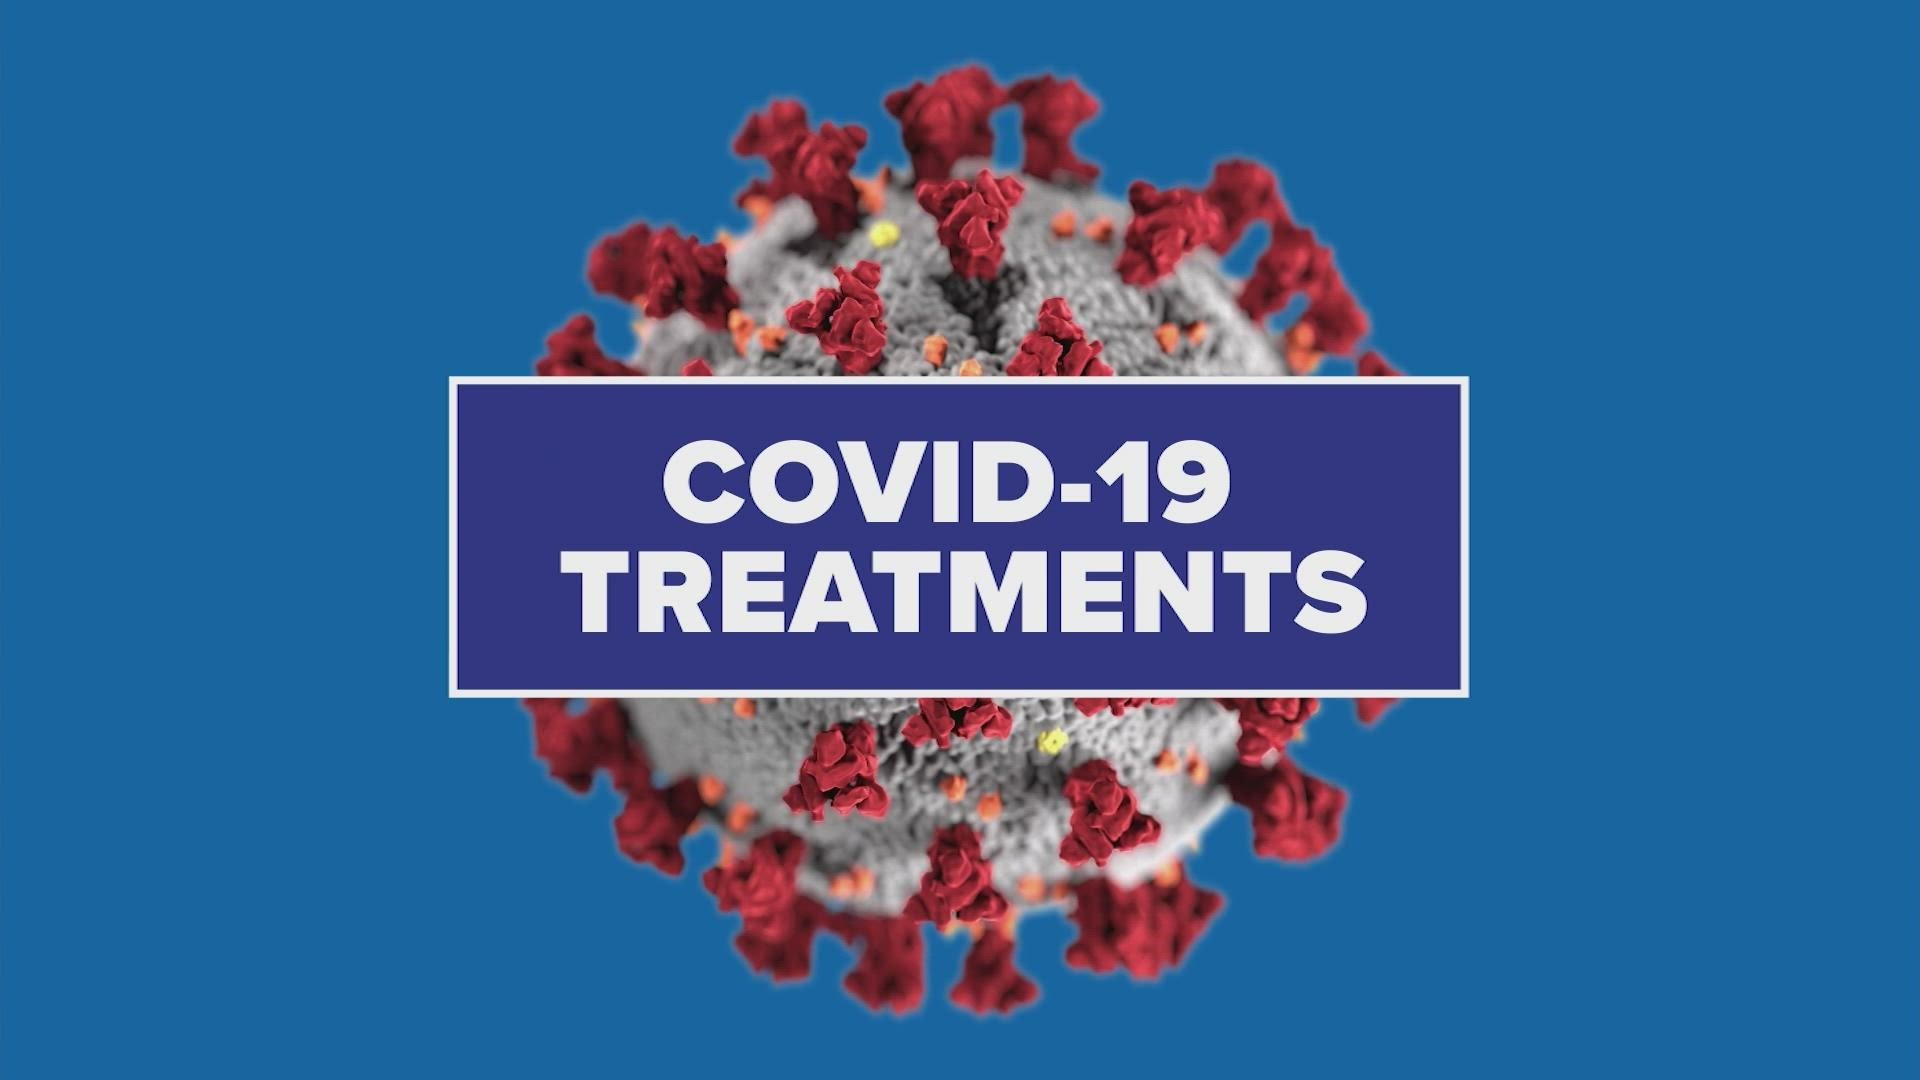 Here's a look at the treatments available for COVID-19 infections.